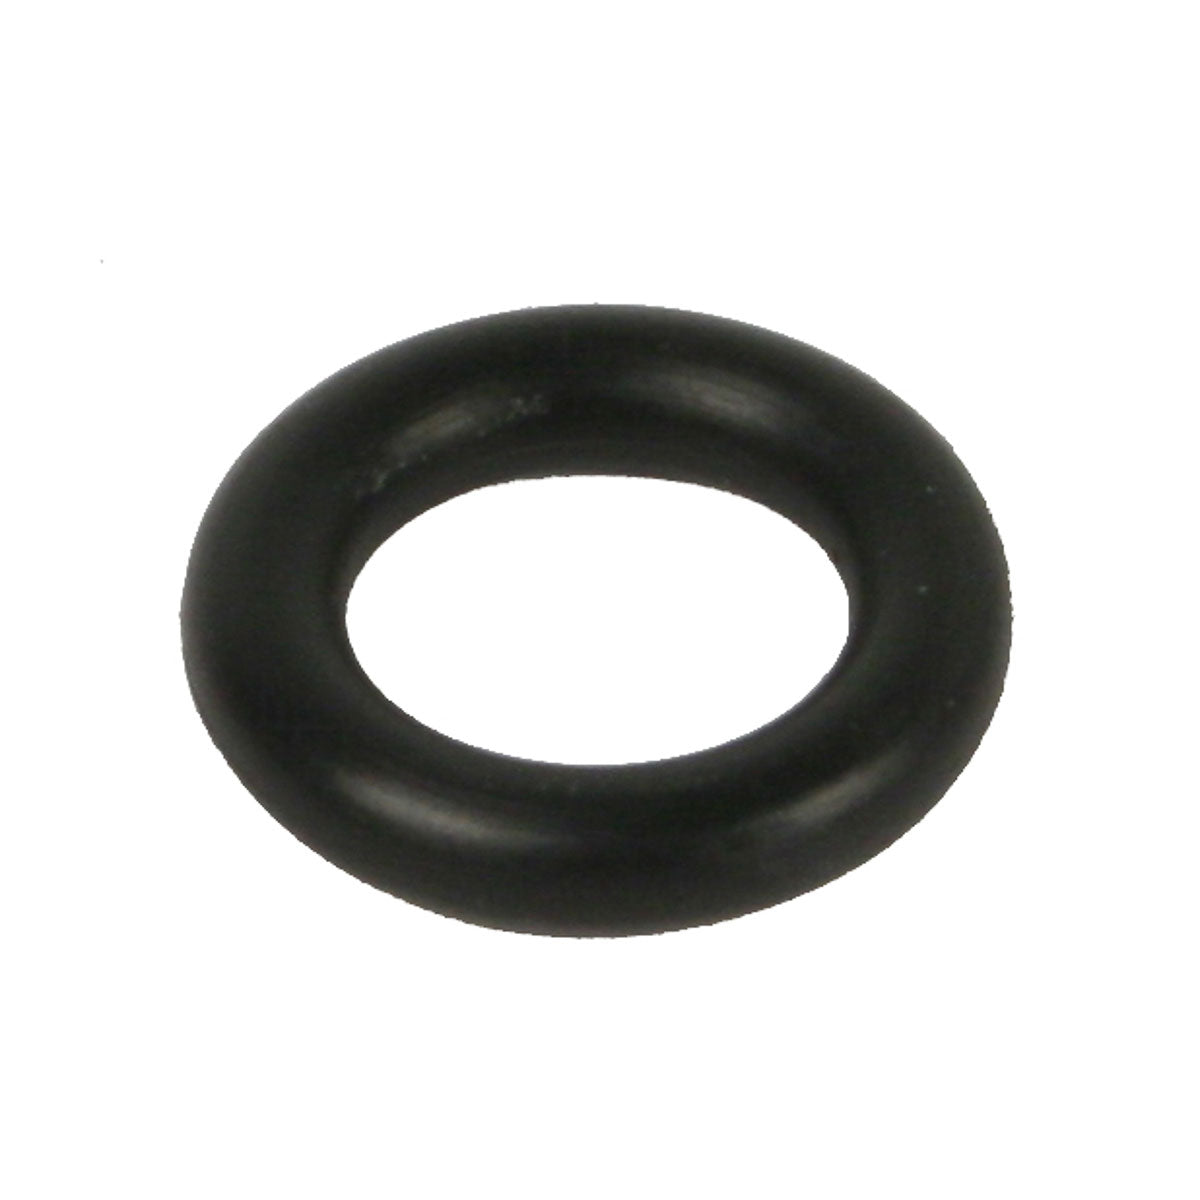 Kartech Fuel Tank O Ring For Tank Fitting